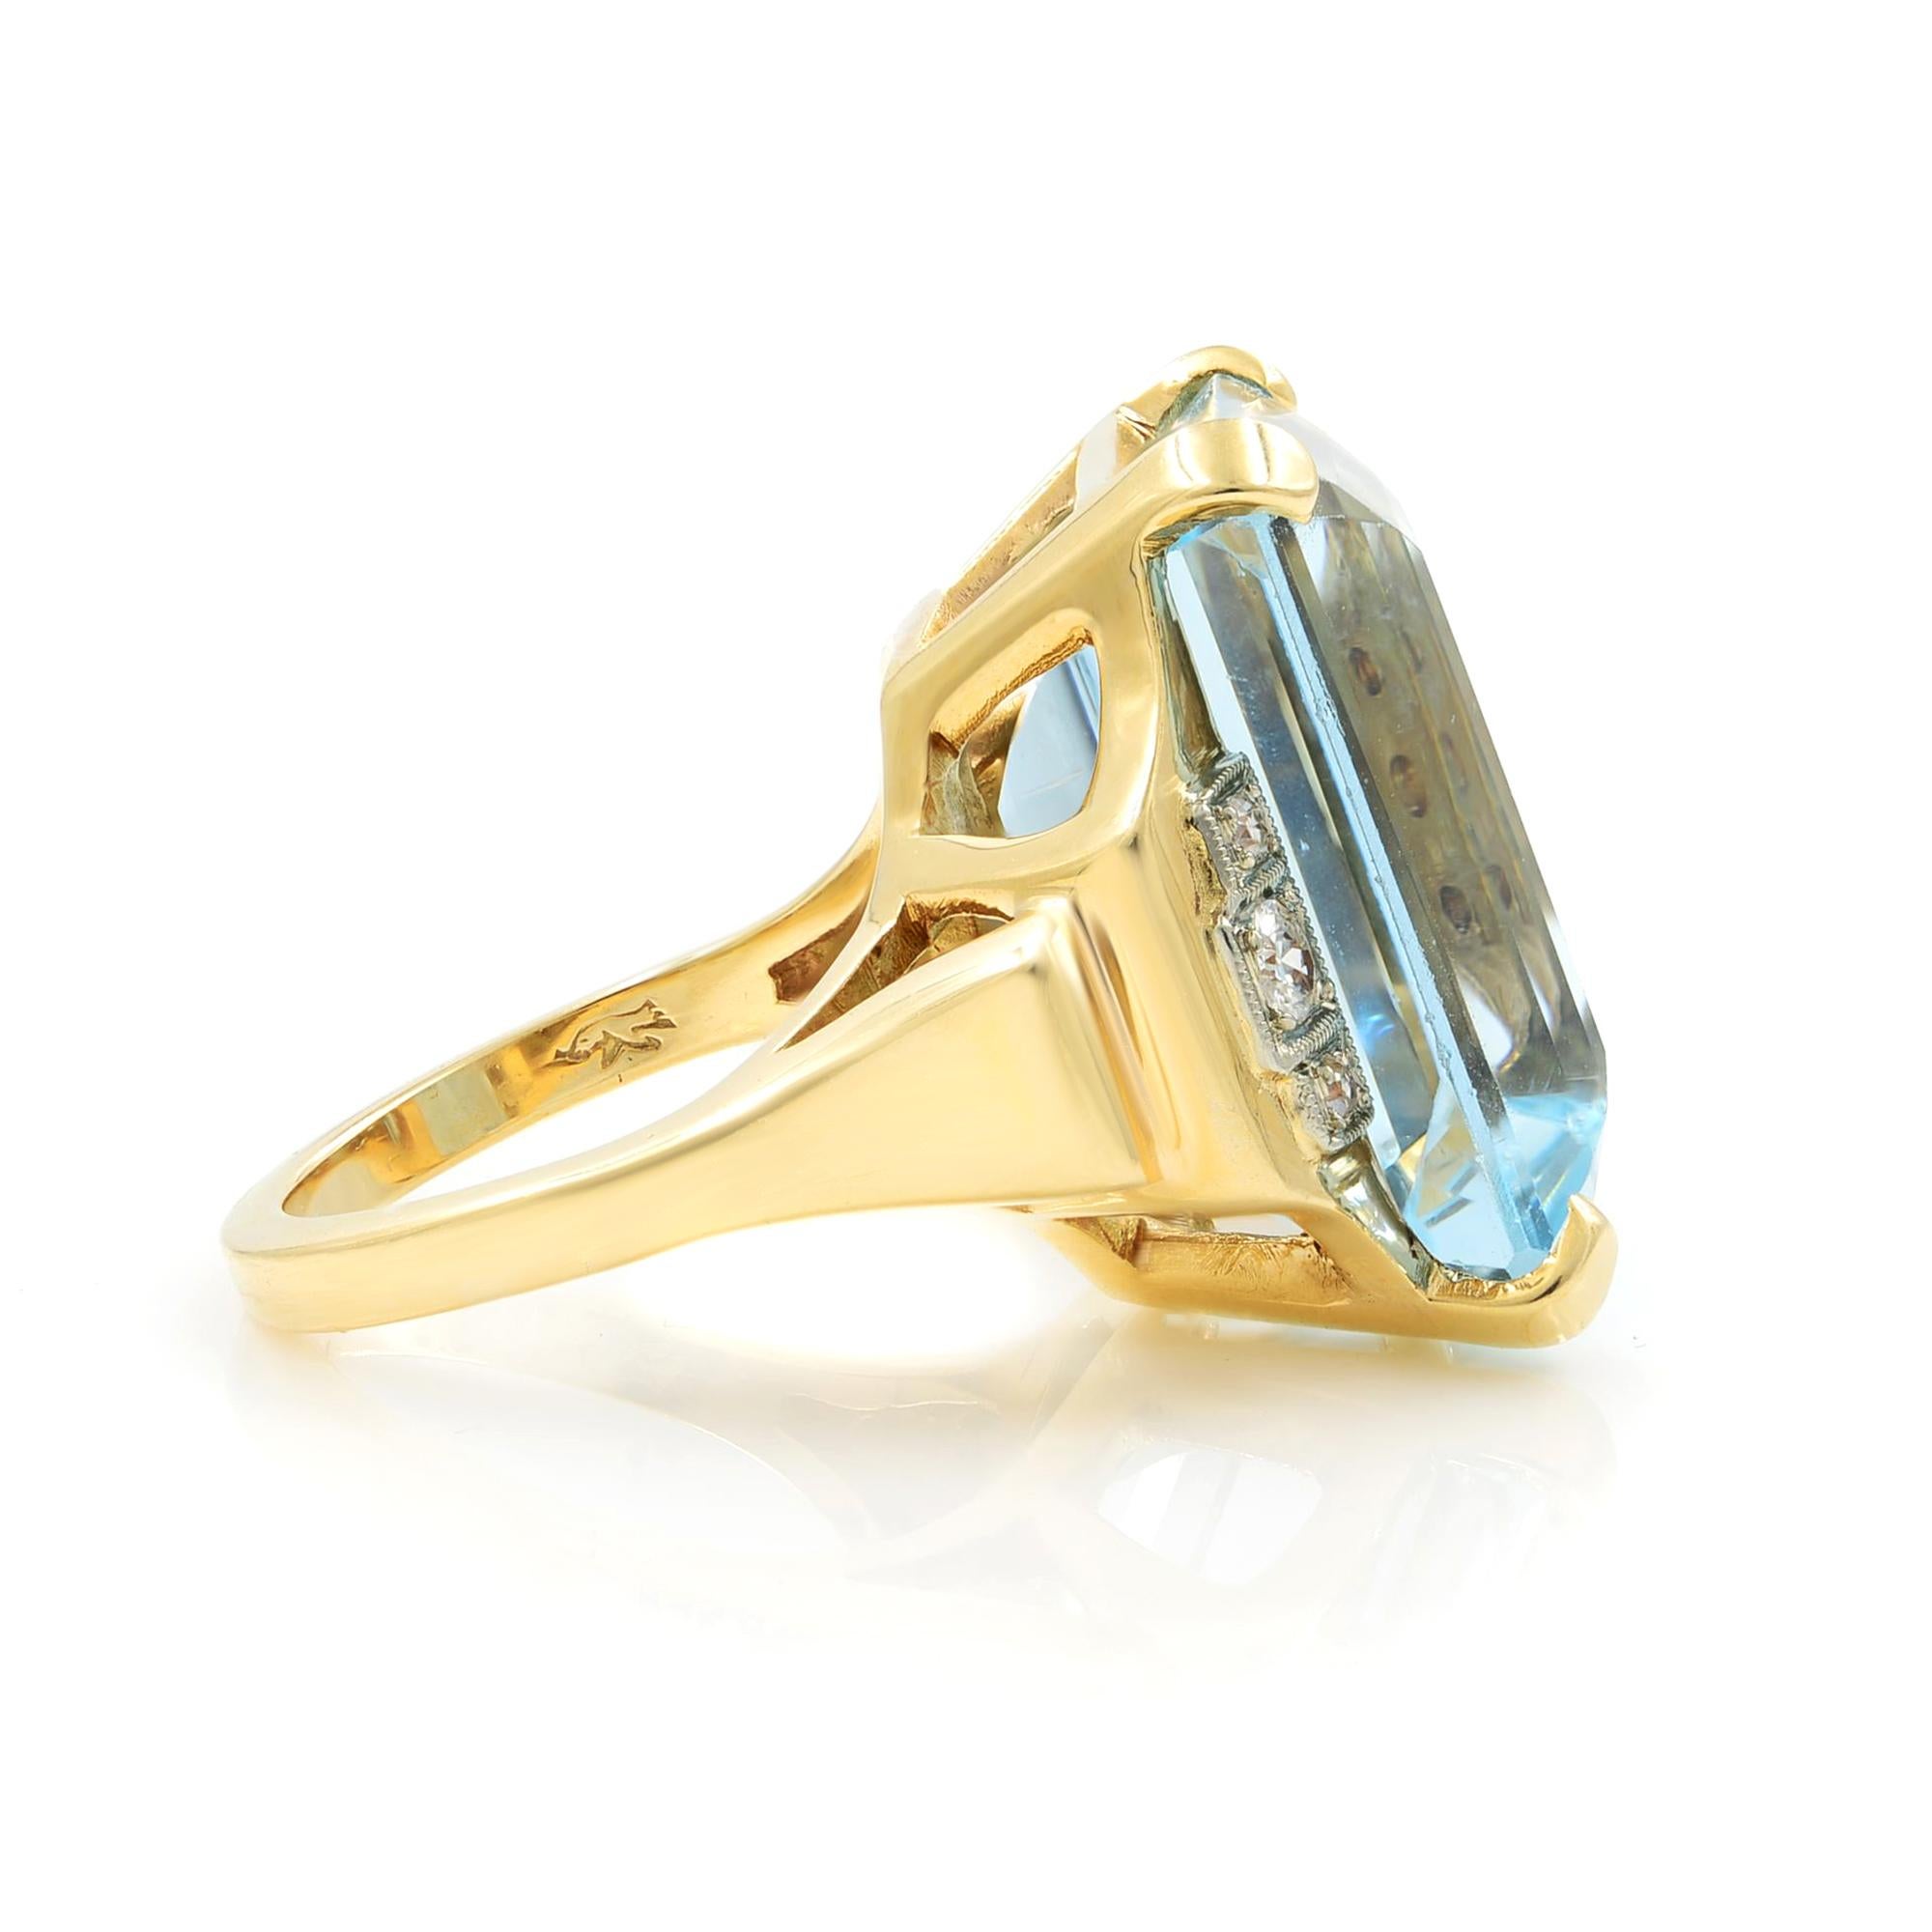 Women's Large Emerald Cut Aquamarineand Diamond Ring 23.76Cts 14K Yellow Gold For Sale